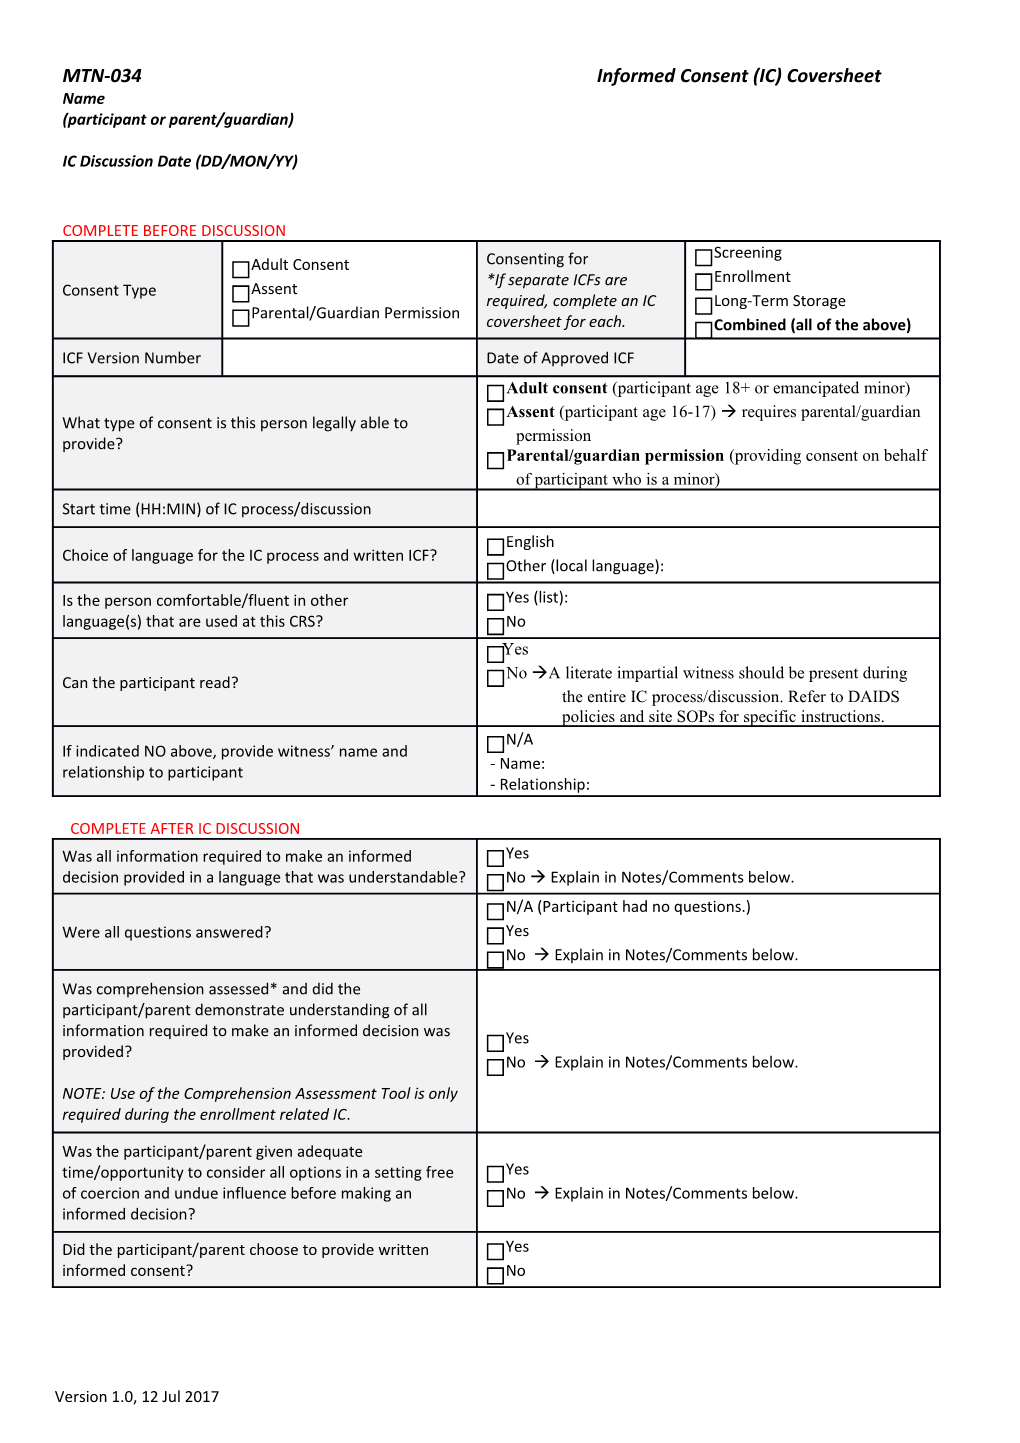 MTN-034 Informed Consent (IC) Coversheet